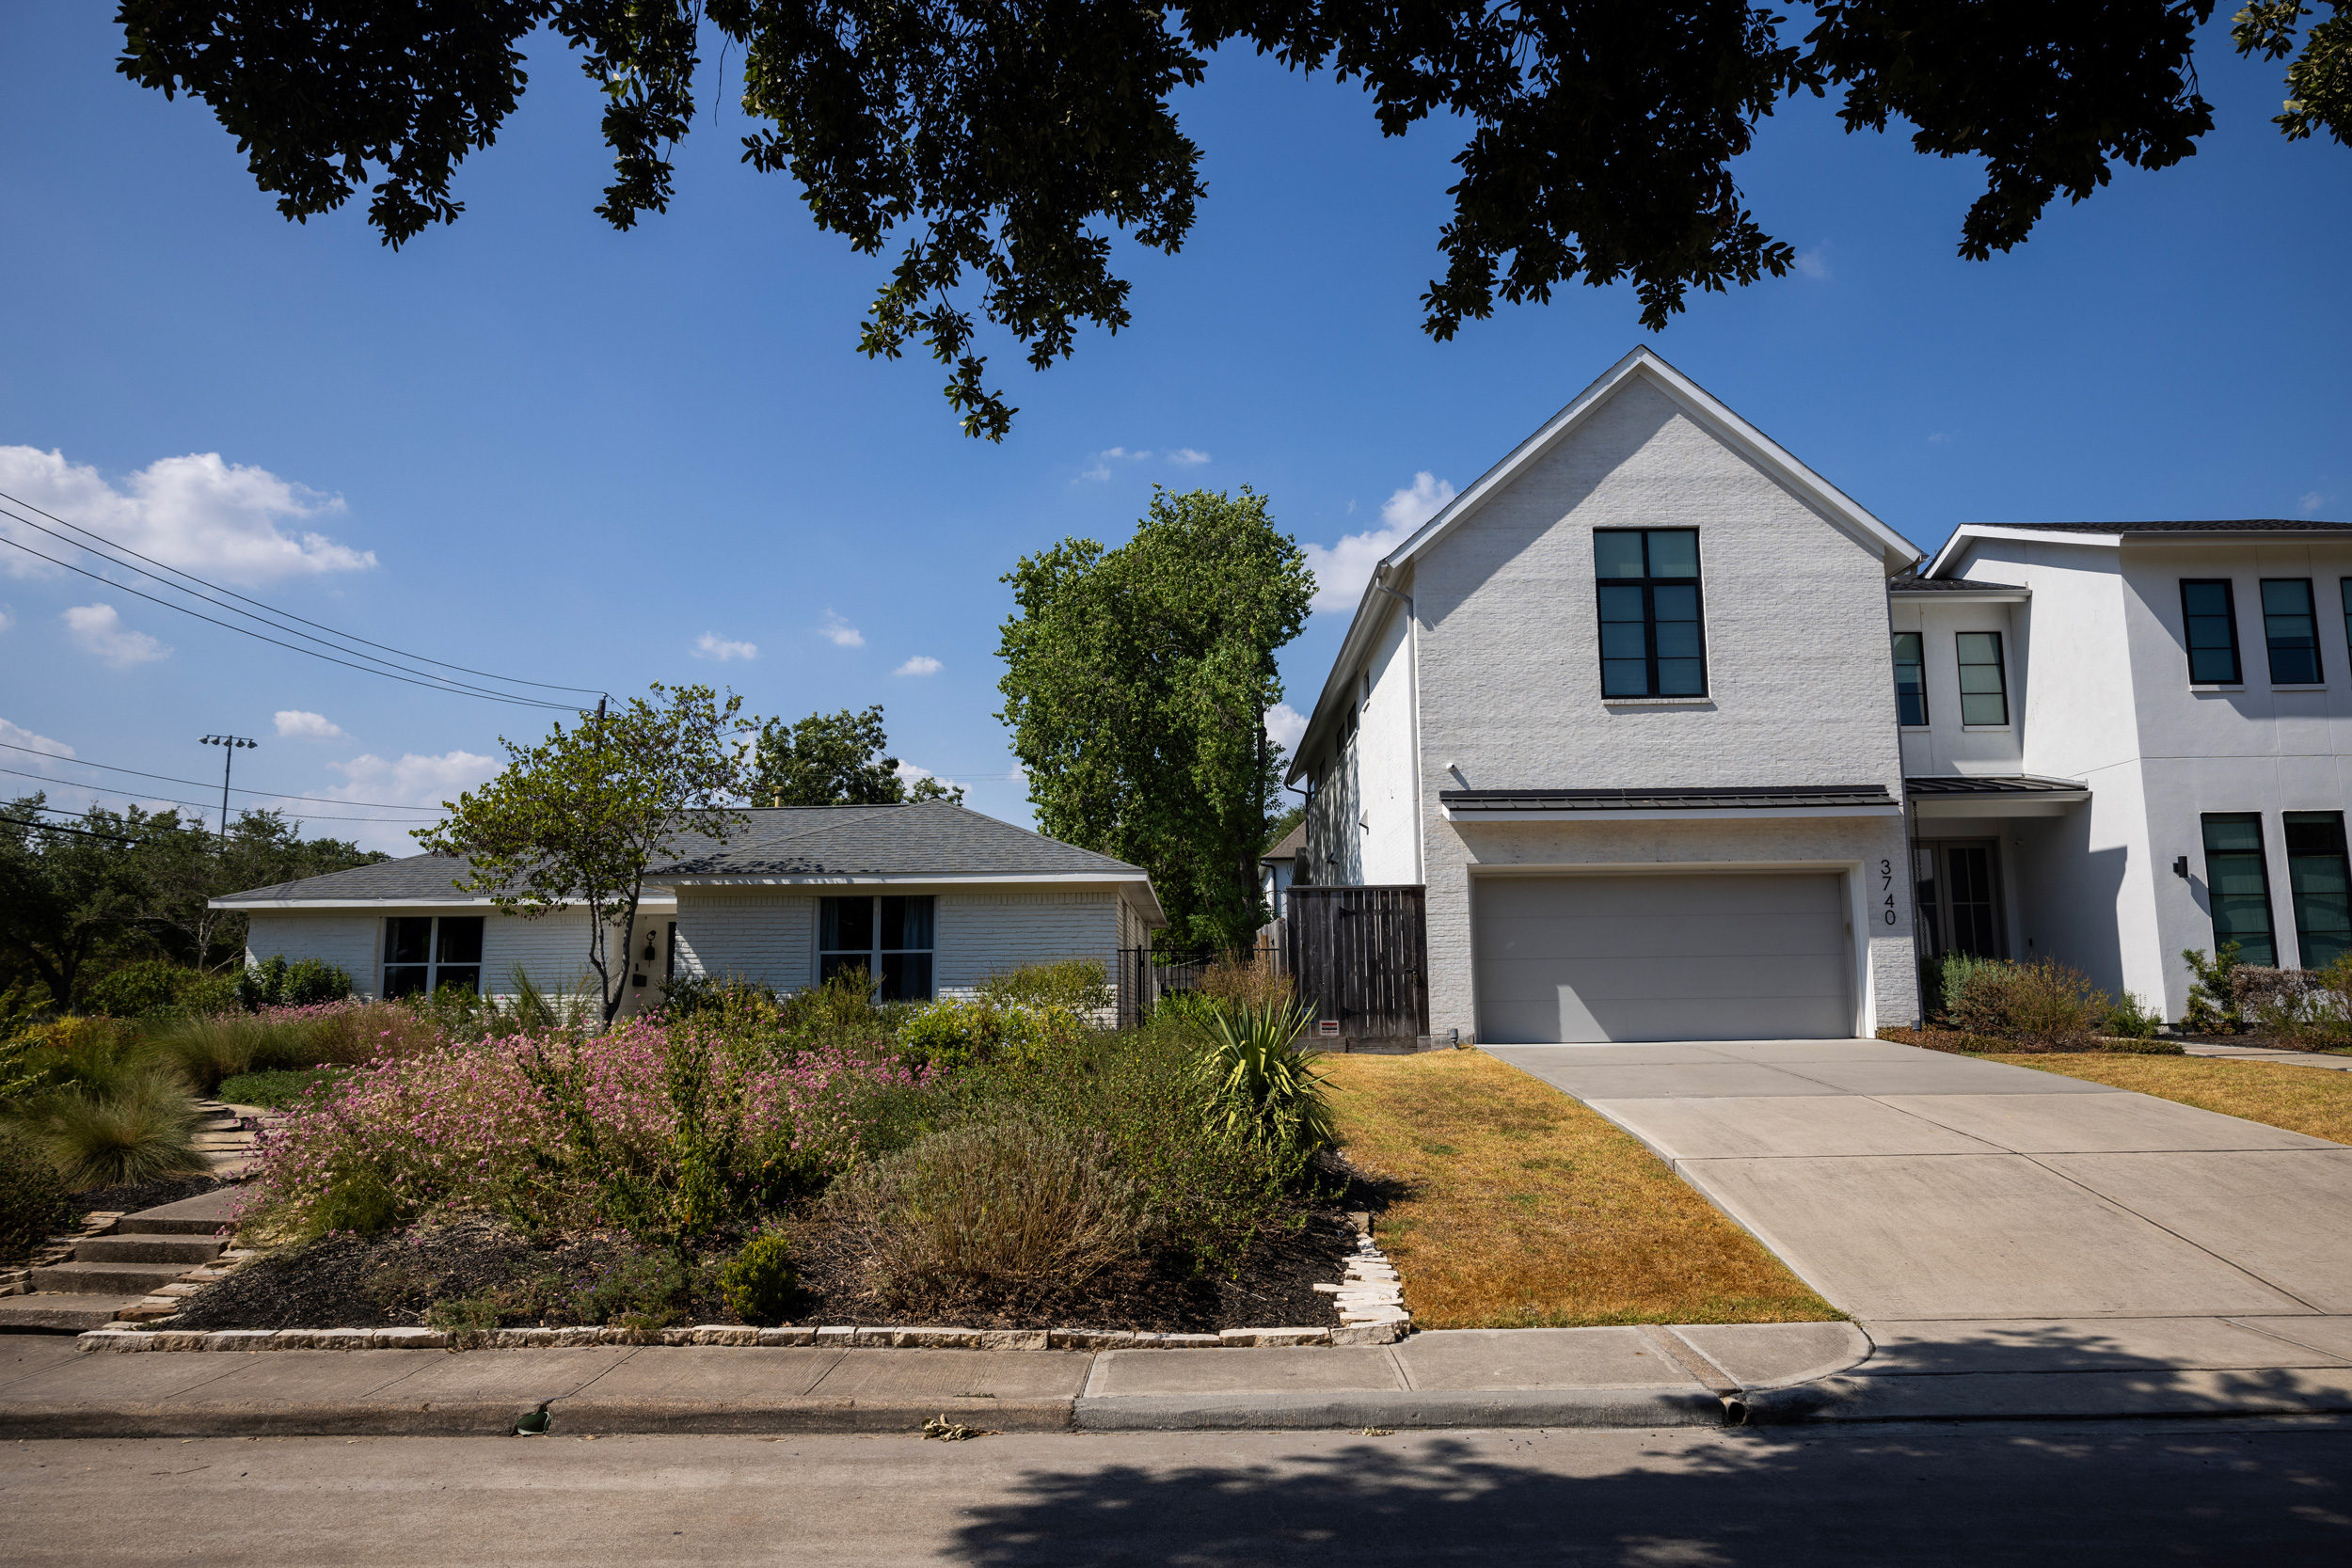 Native plants fill Claudia Schnelle’s front yard, at left, as grass dries due to heat on her neighbors lawn, at right.